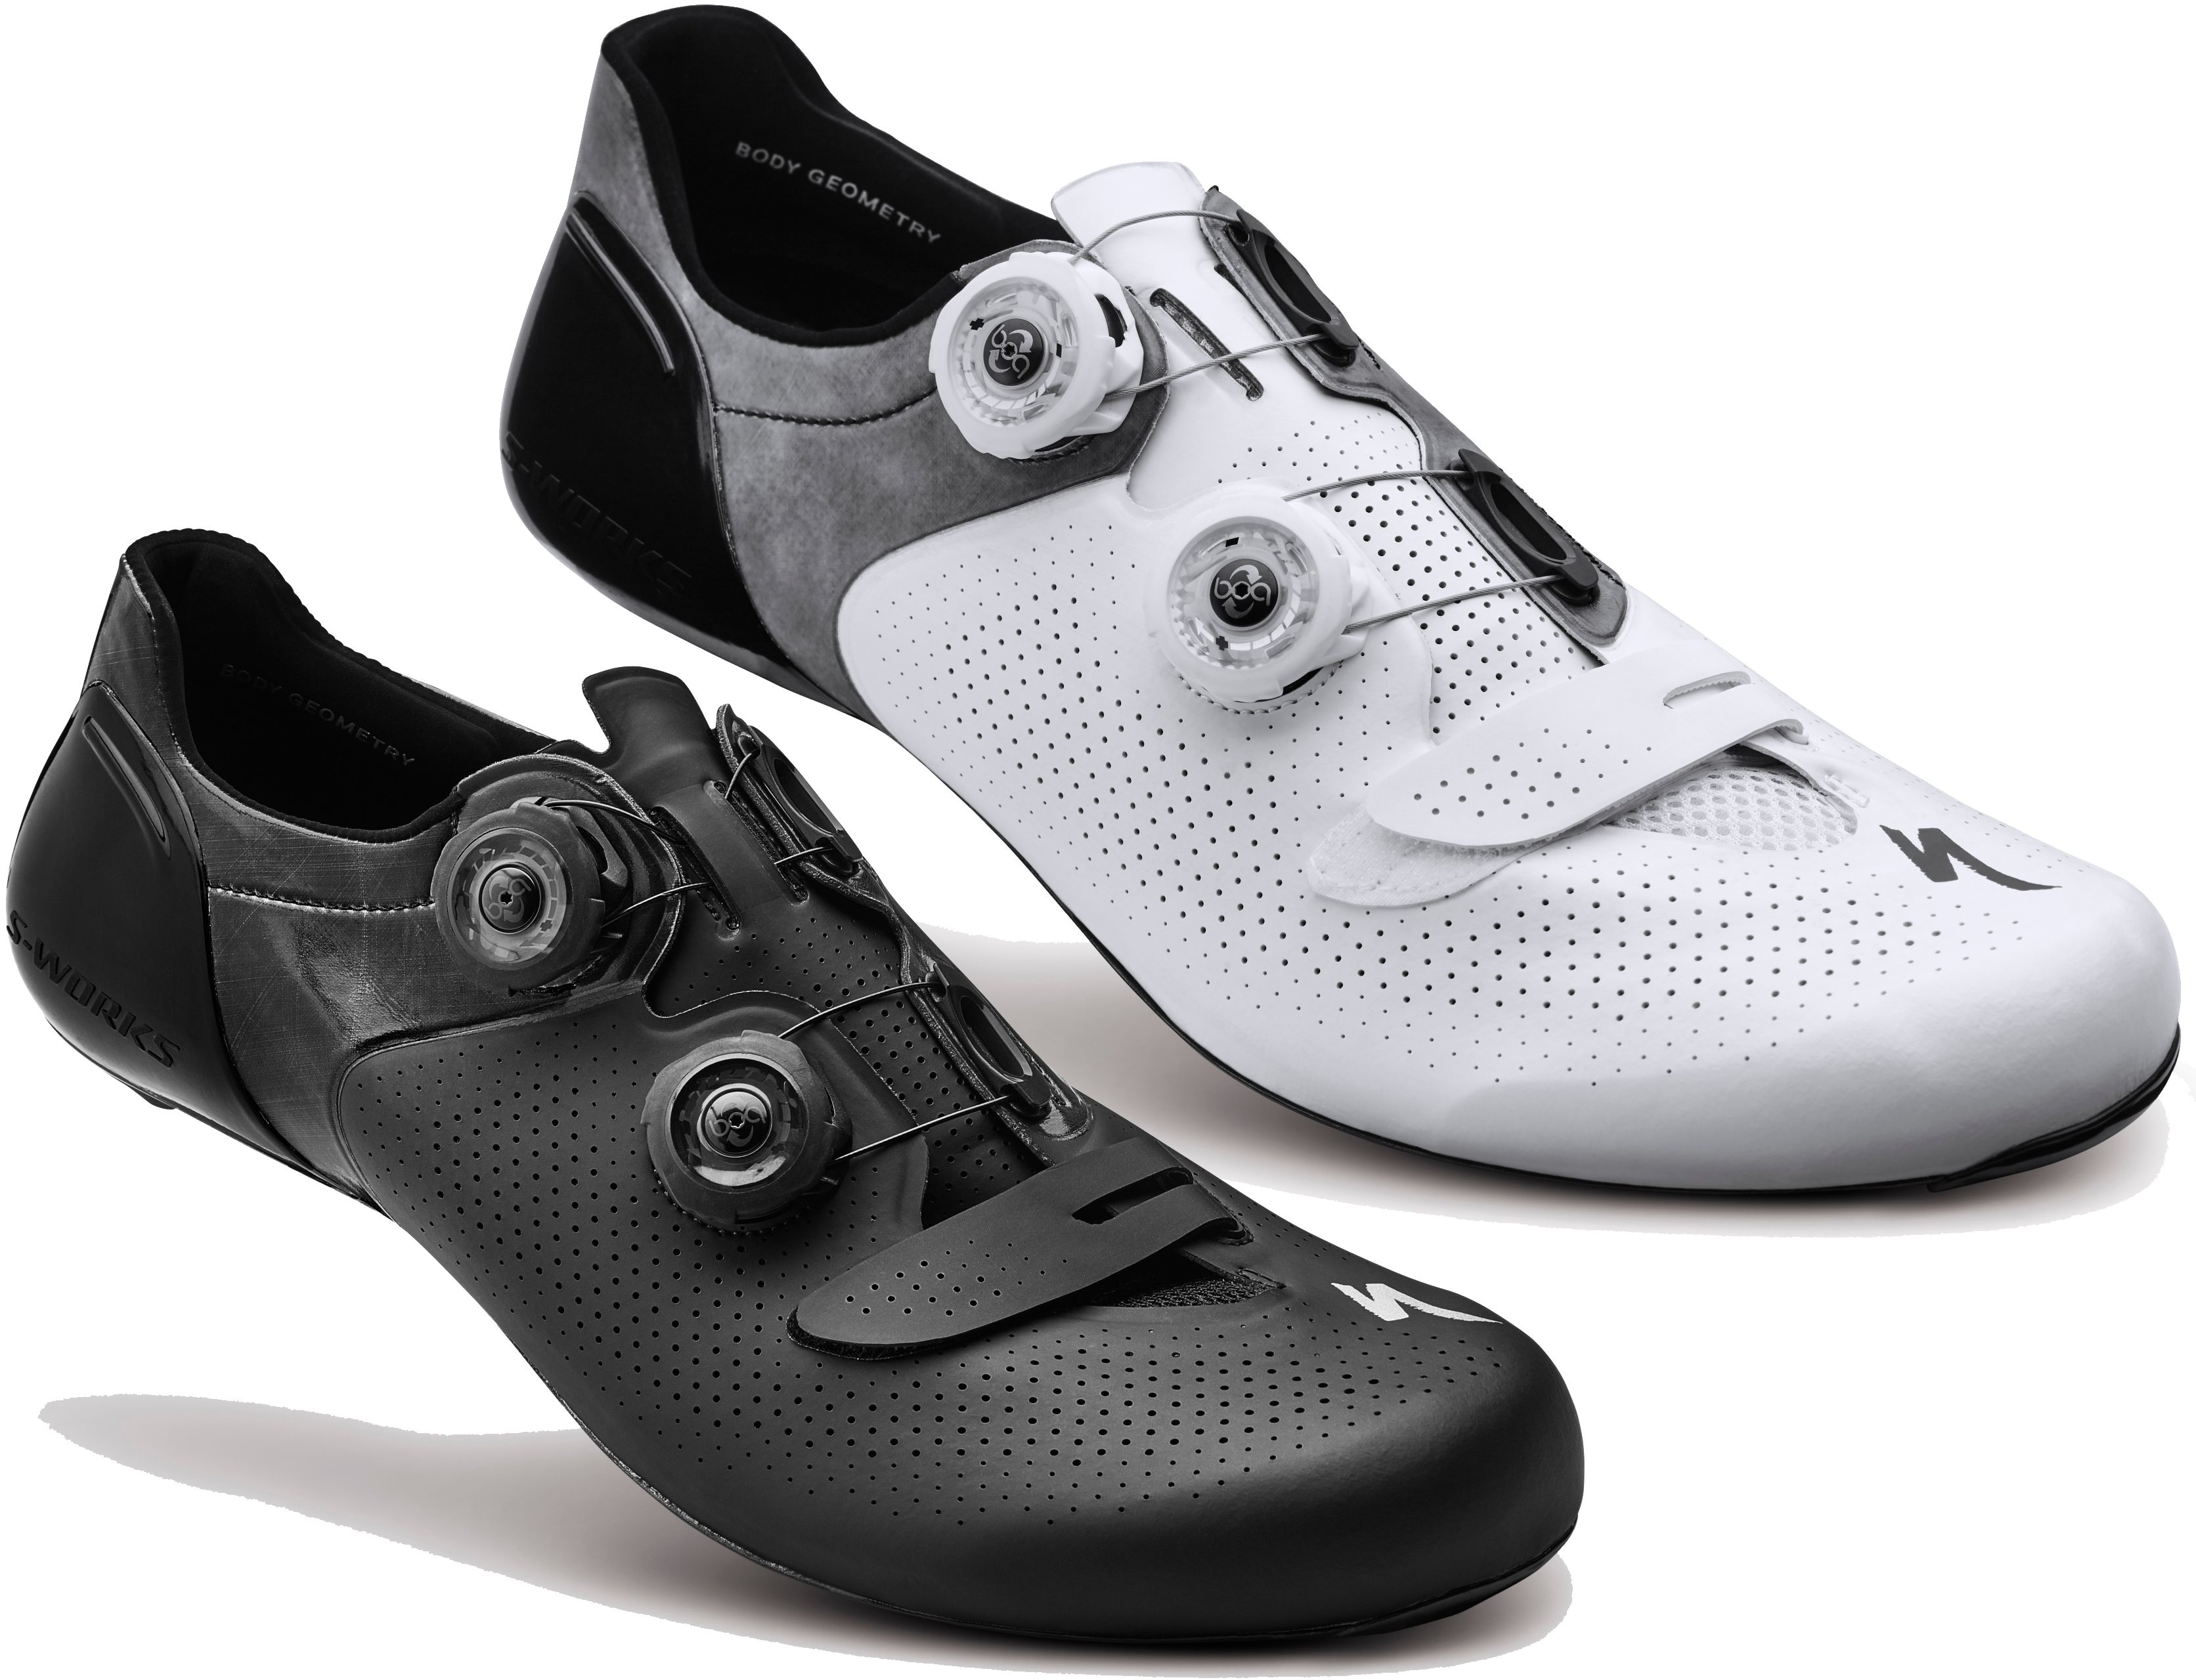 specialised cycling shoes real 07f7b 430eb